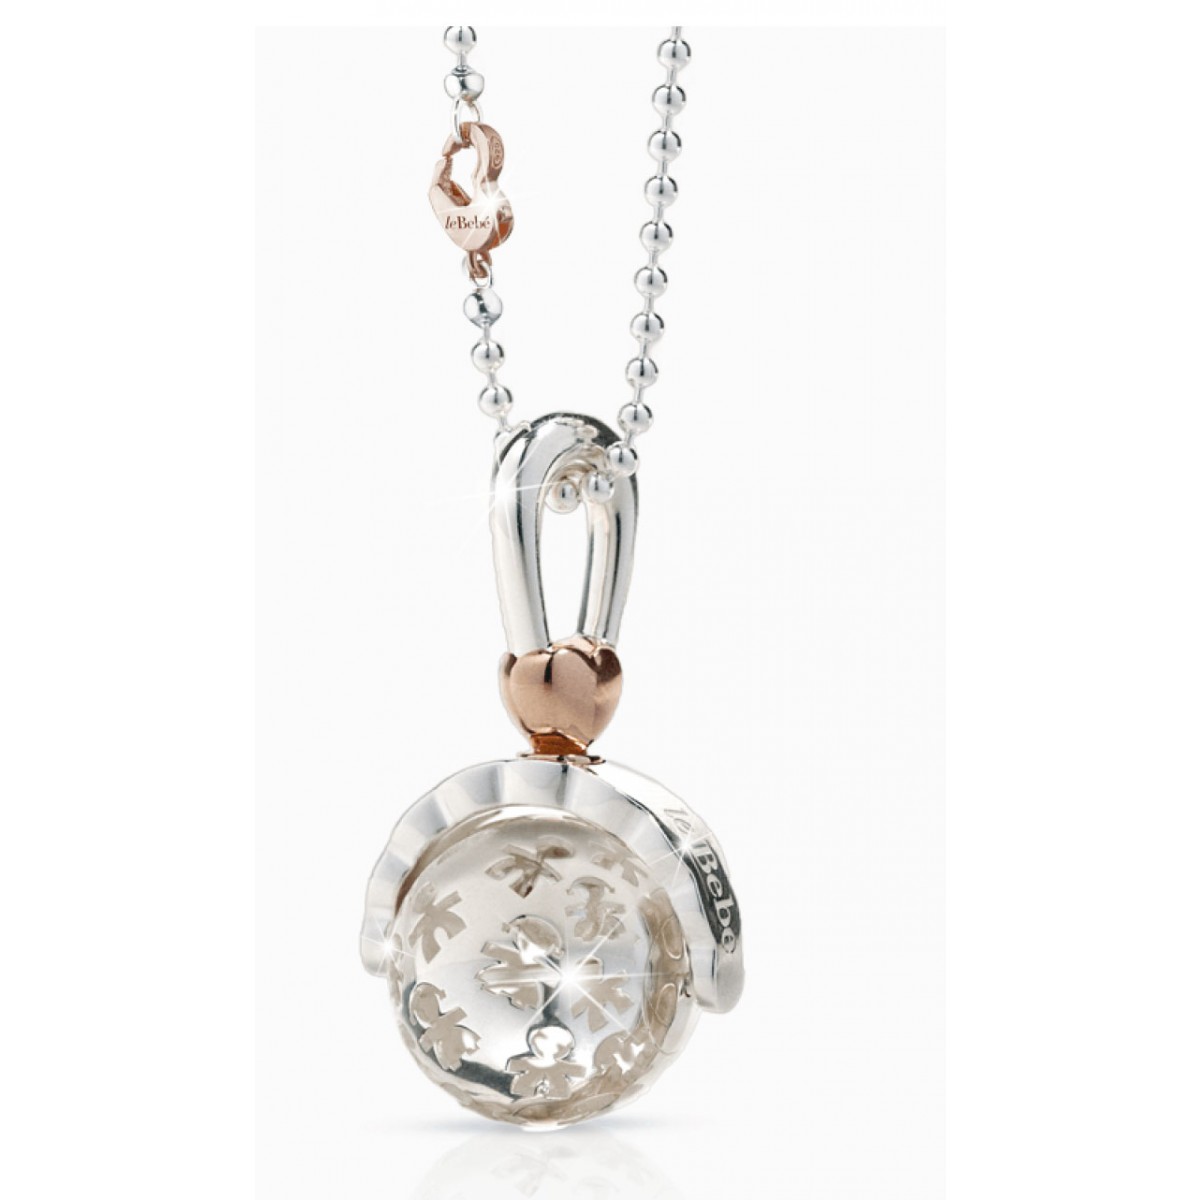 Jewelry Necklace Le Bebe Snm006 In Sterling Silver With A Rose Gold Plated Heart